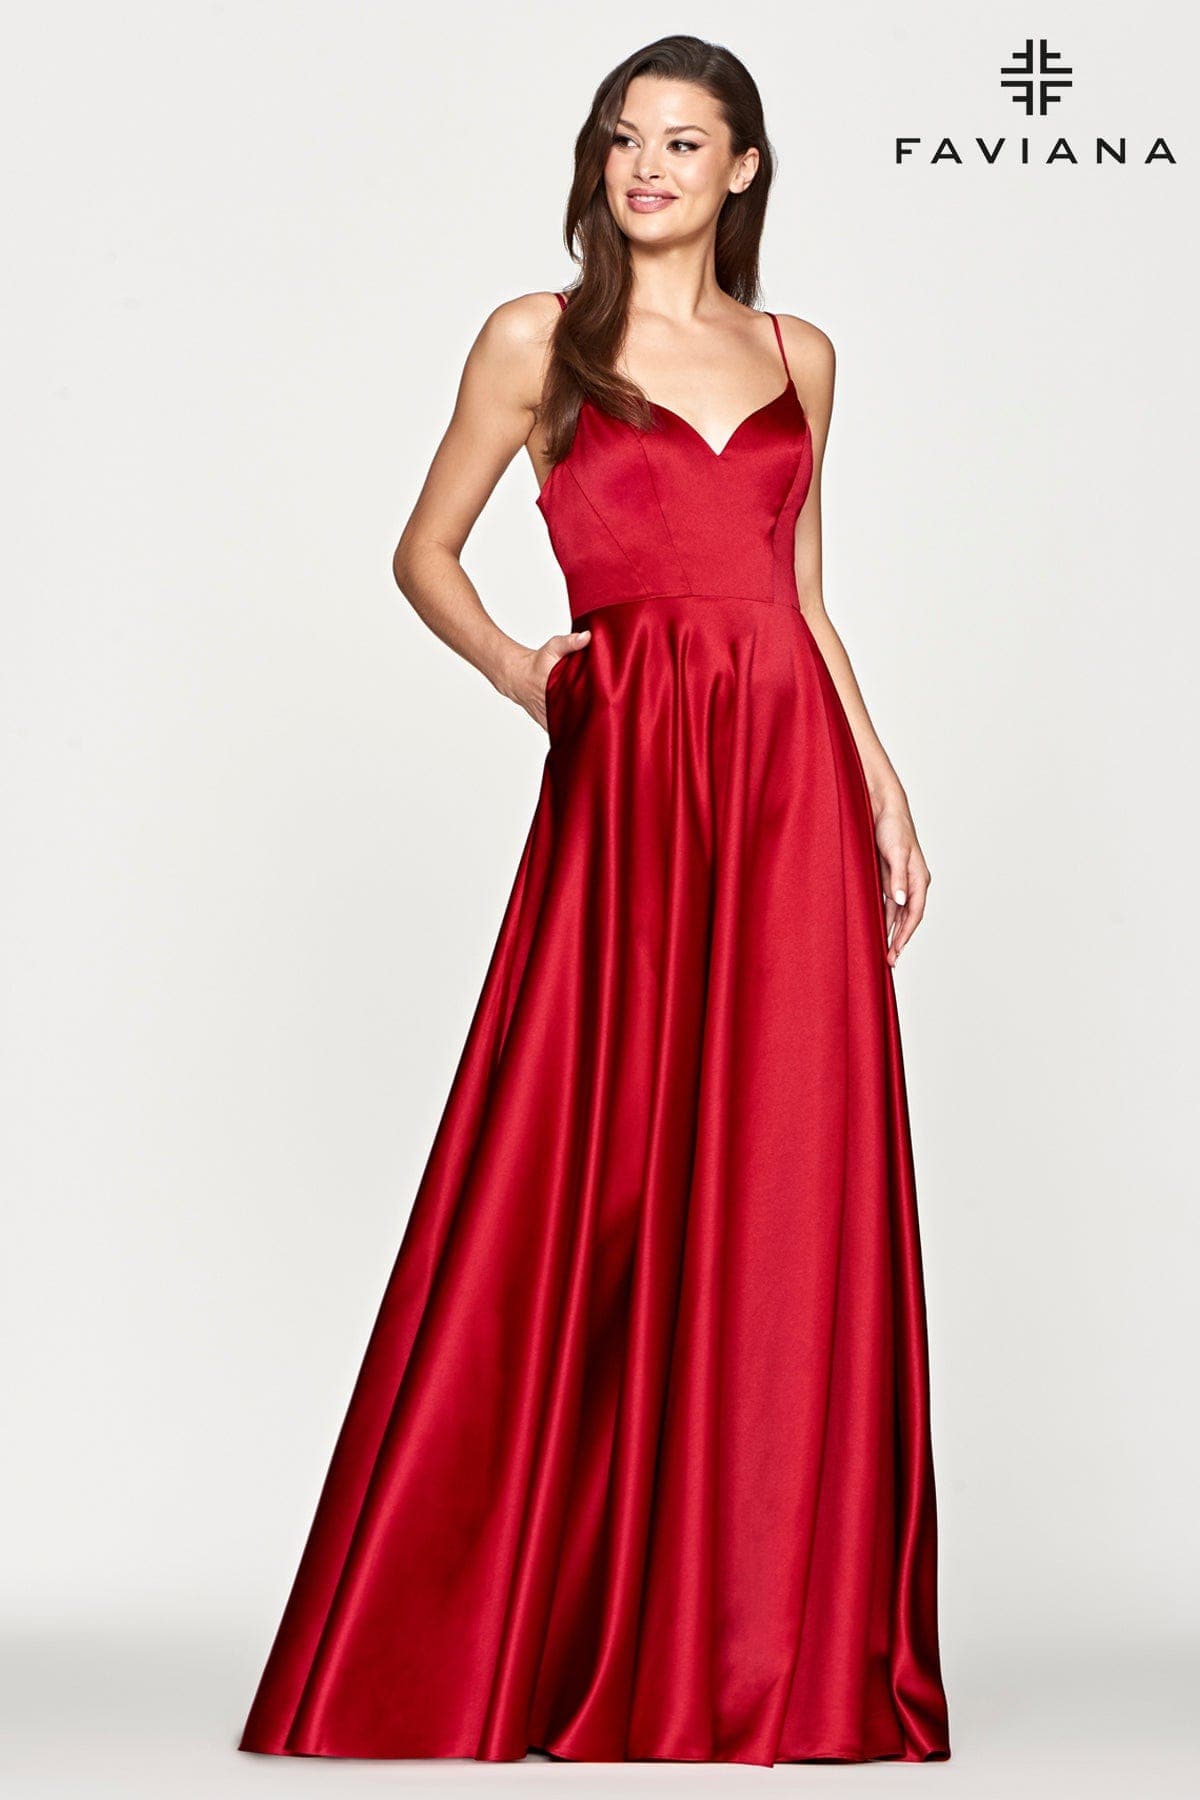 Flowy Sweetheart Neckline Long Dress With Lace Up Bodice